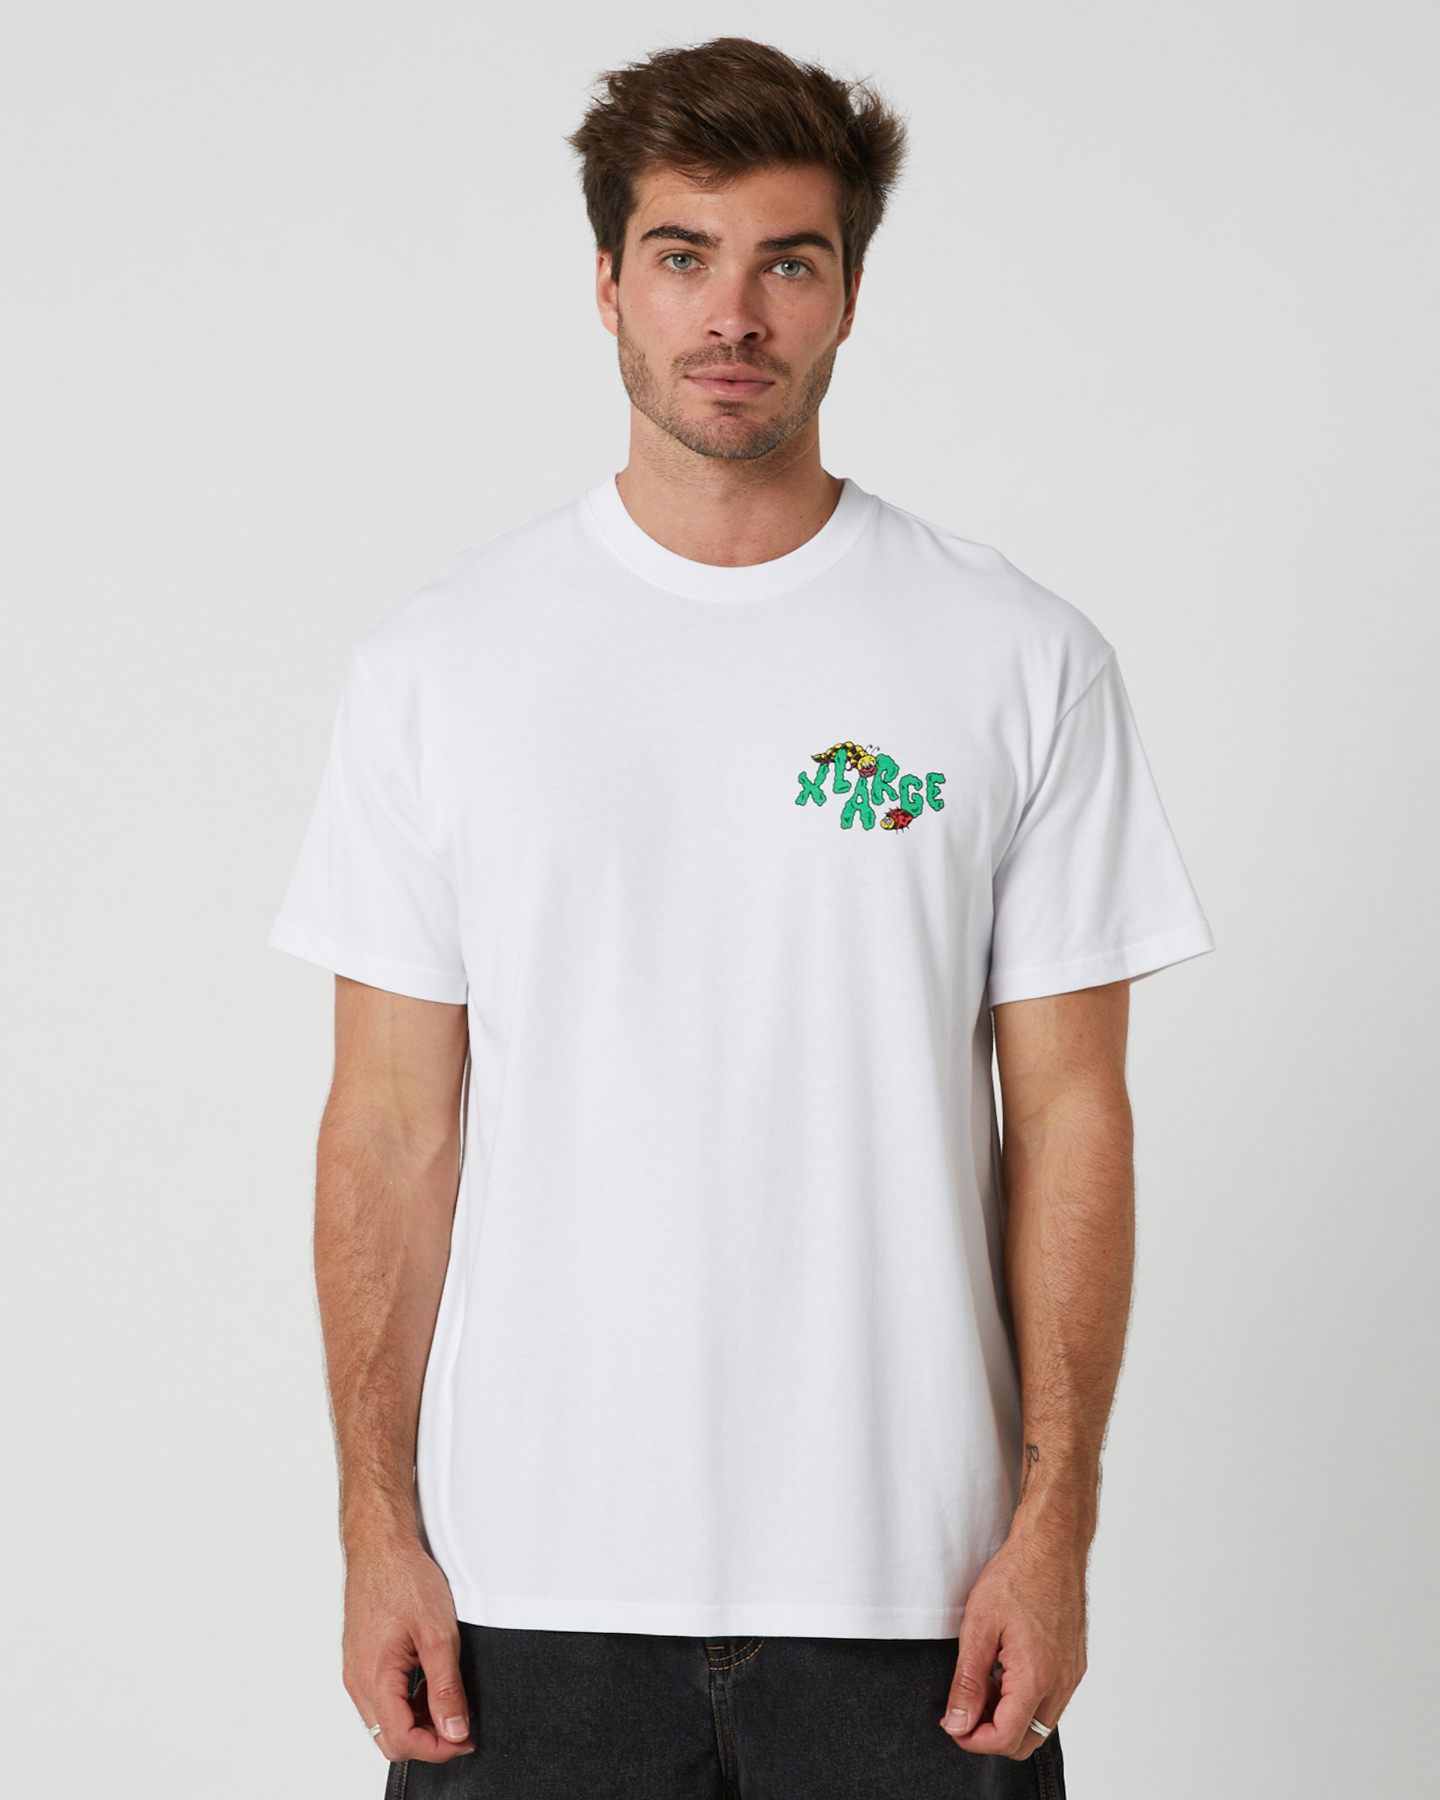 Xlarge Bugs Ss Tee - White | SurfStitch